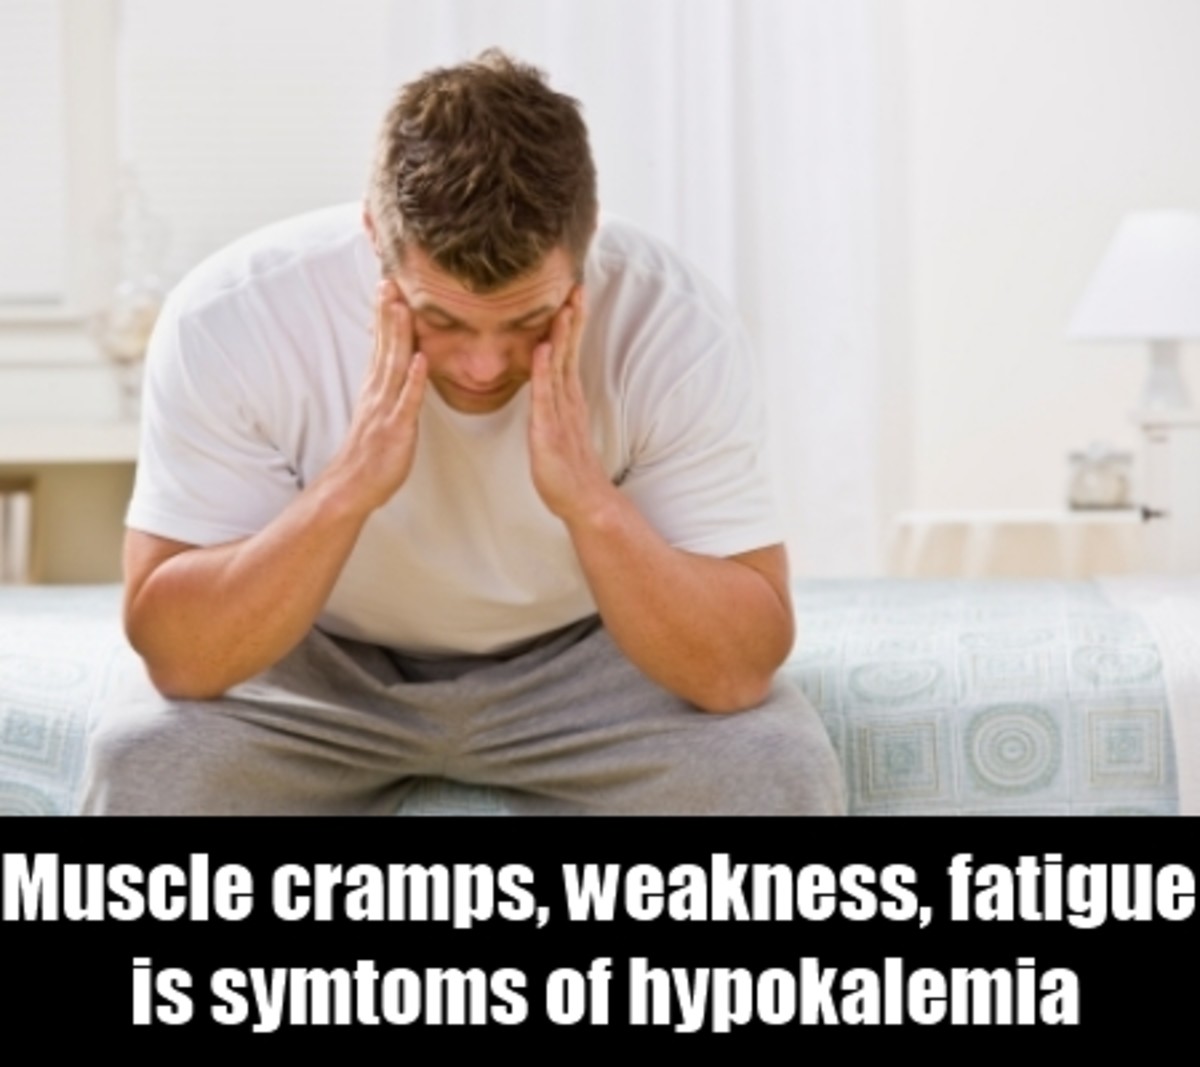 Hypokalemia sufferes feel cramps, fatigue, weakness, confusion - all of these can be treated once the sickness is identified.